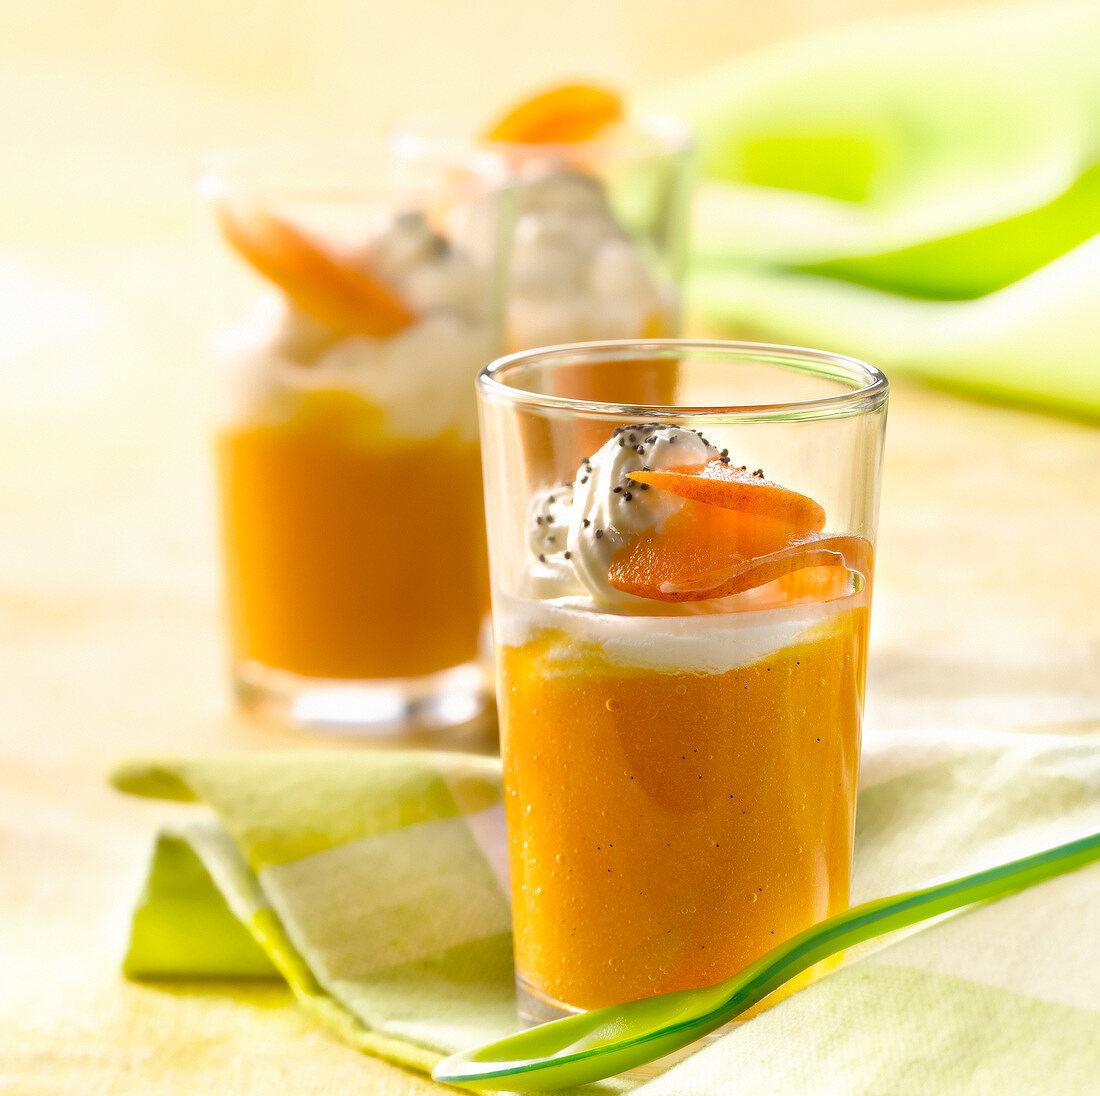 Blended stewed apricots with mascarpone mousse